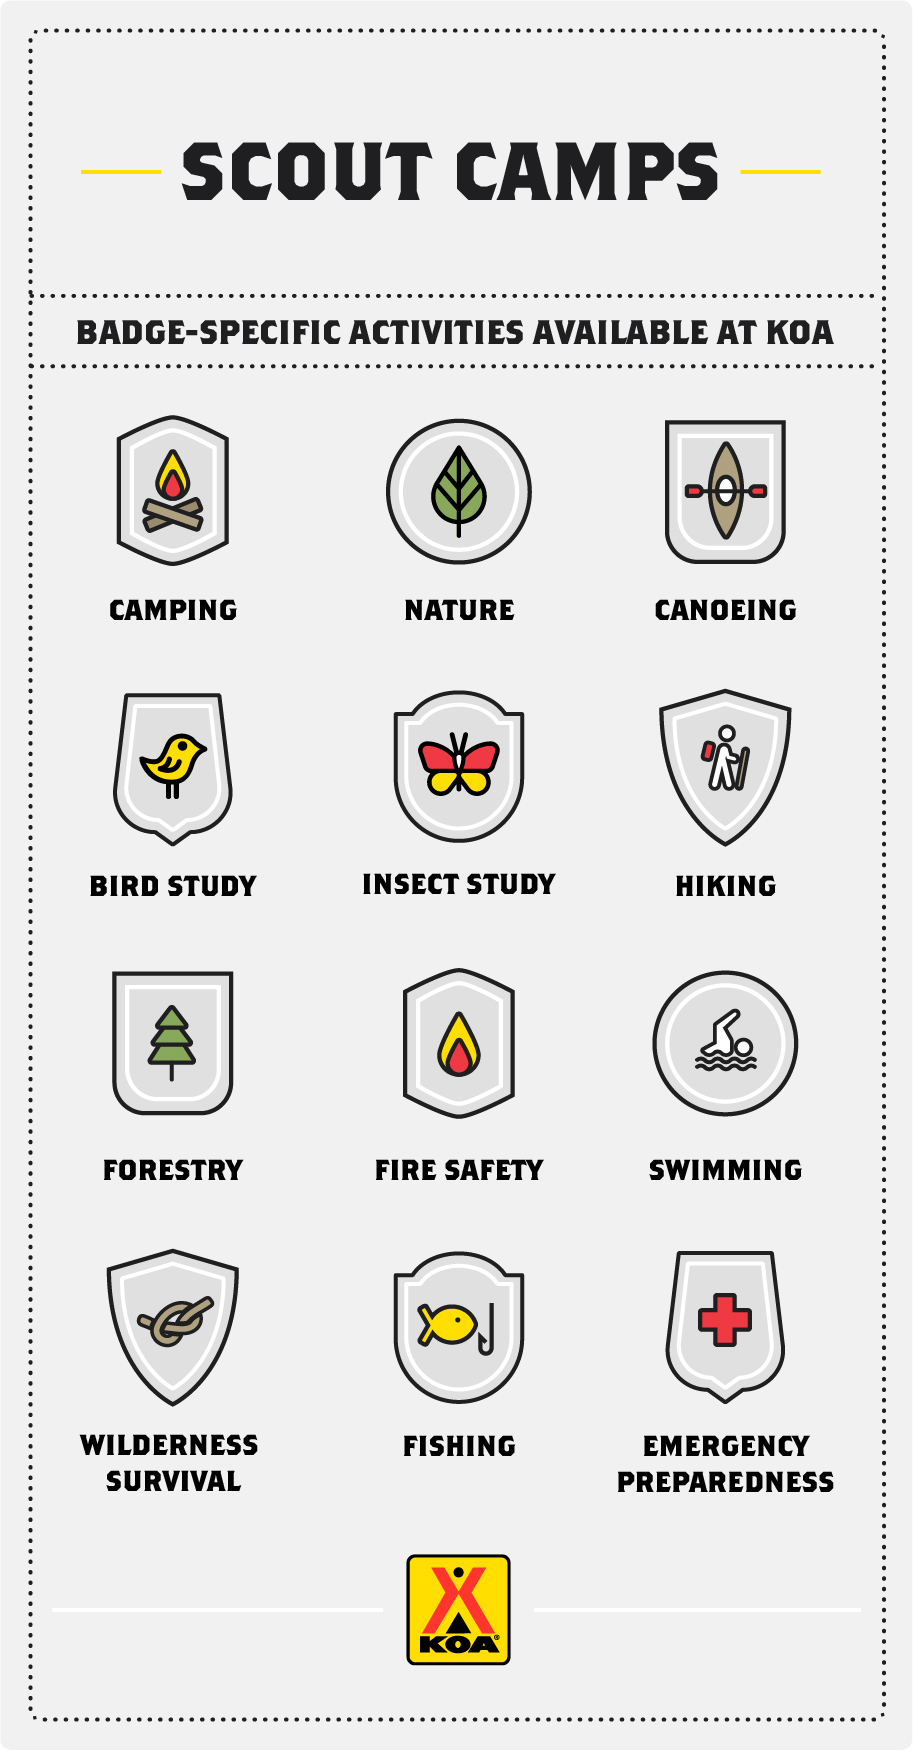 Scout Camps Badge Specific Activities Available at KOA